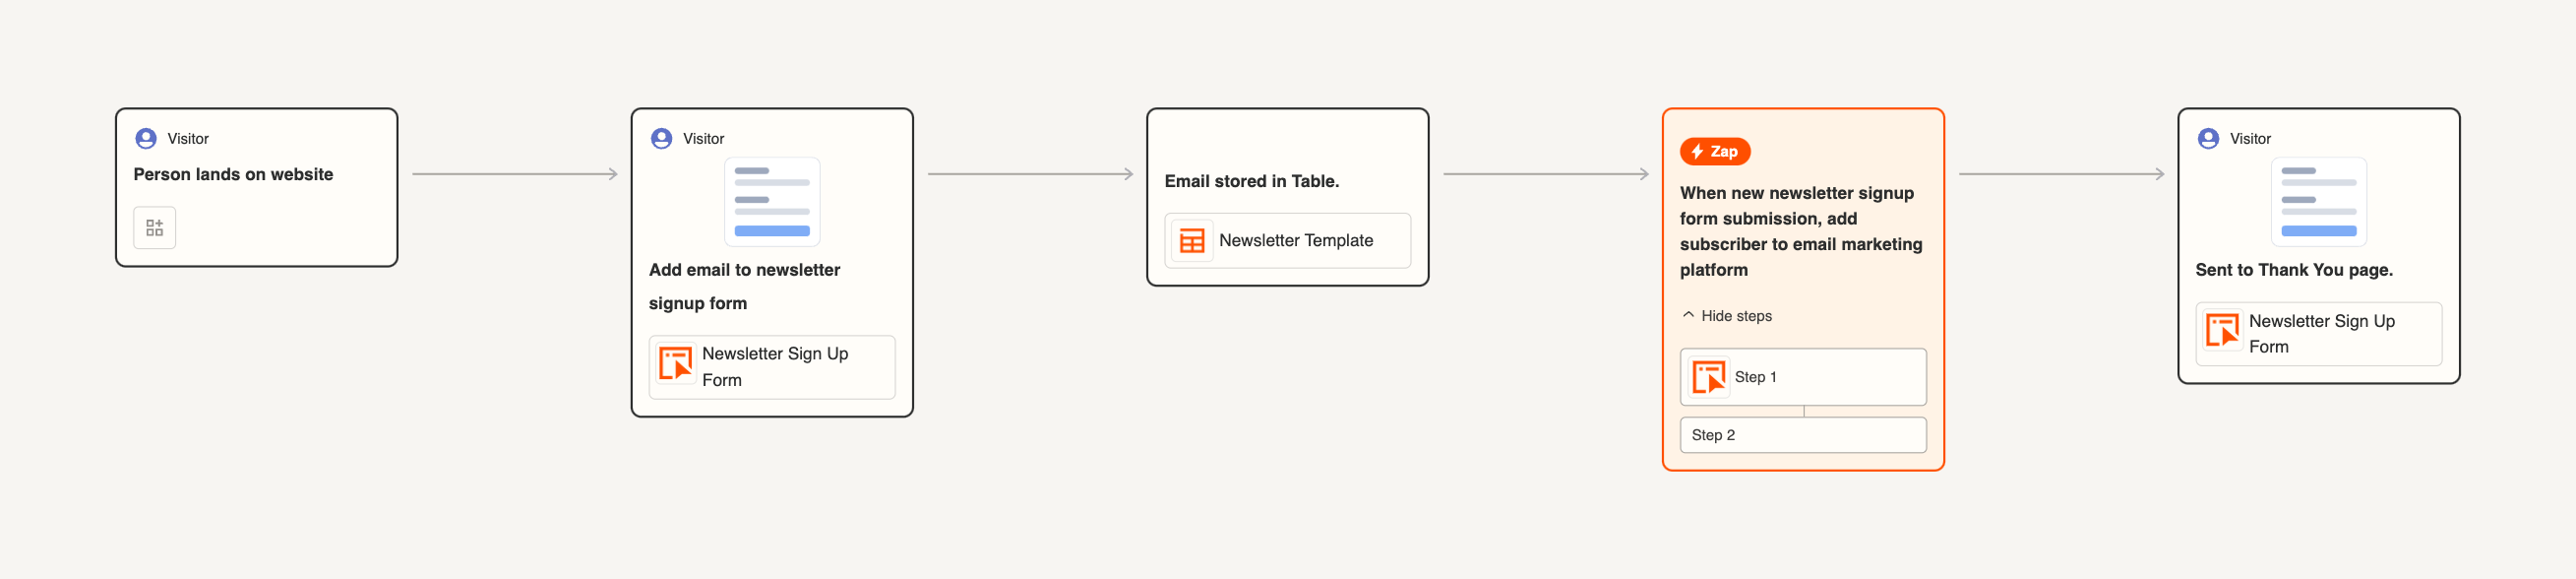 Newsletter signup form process | Canvas